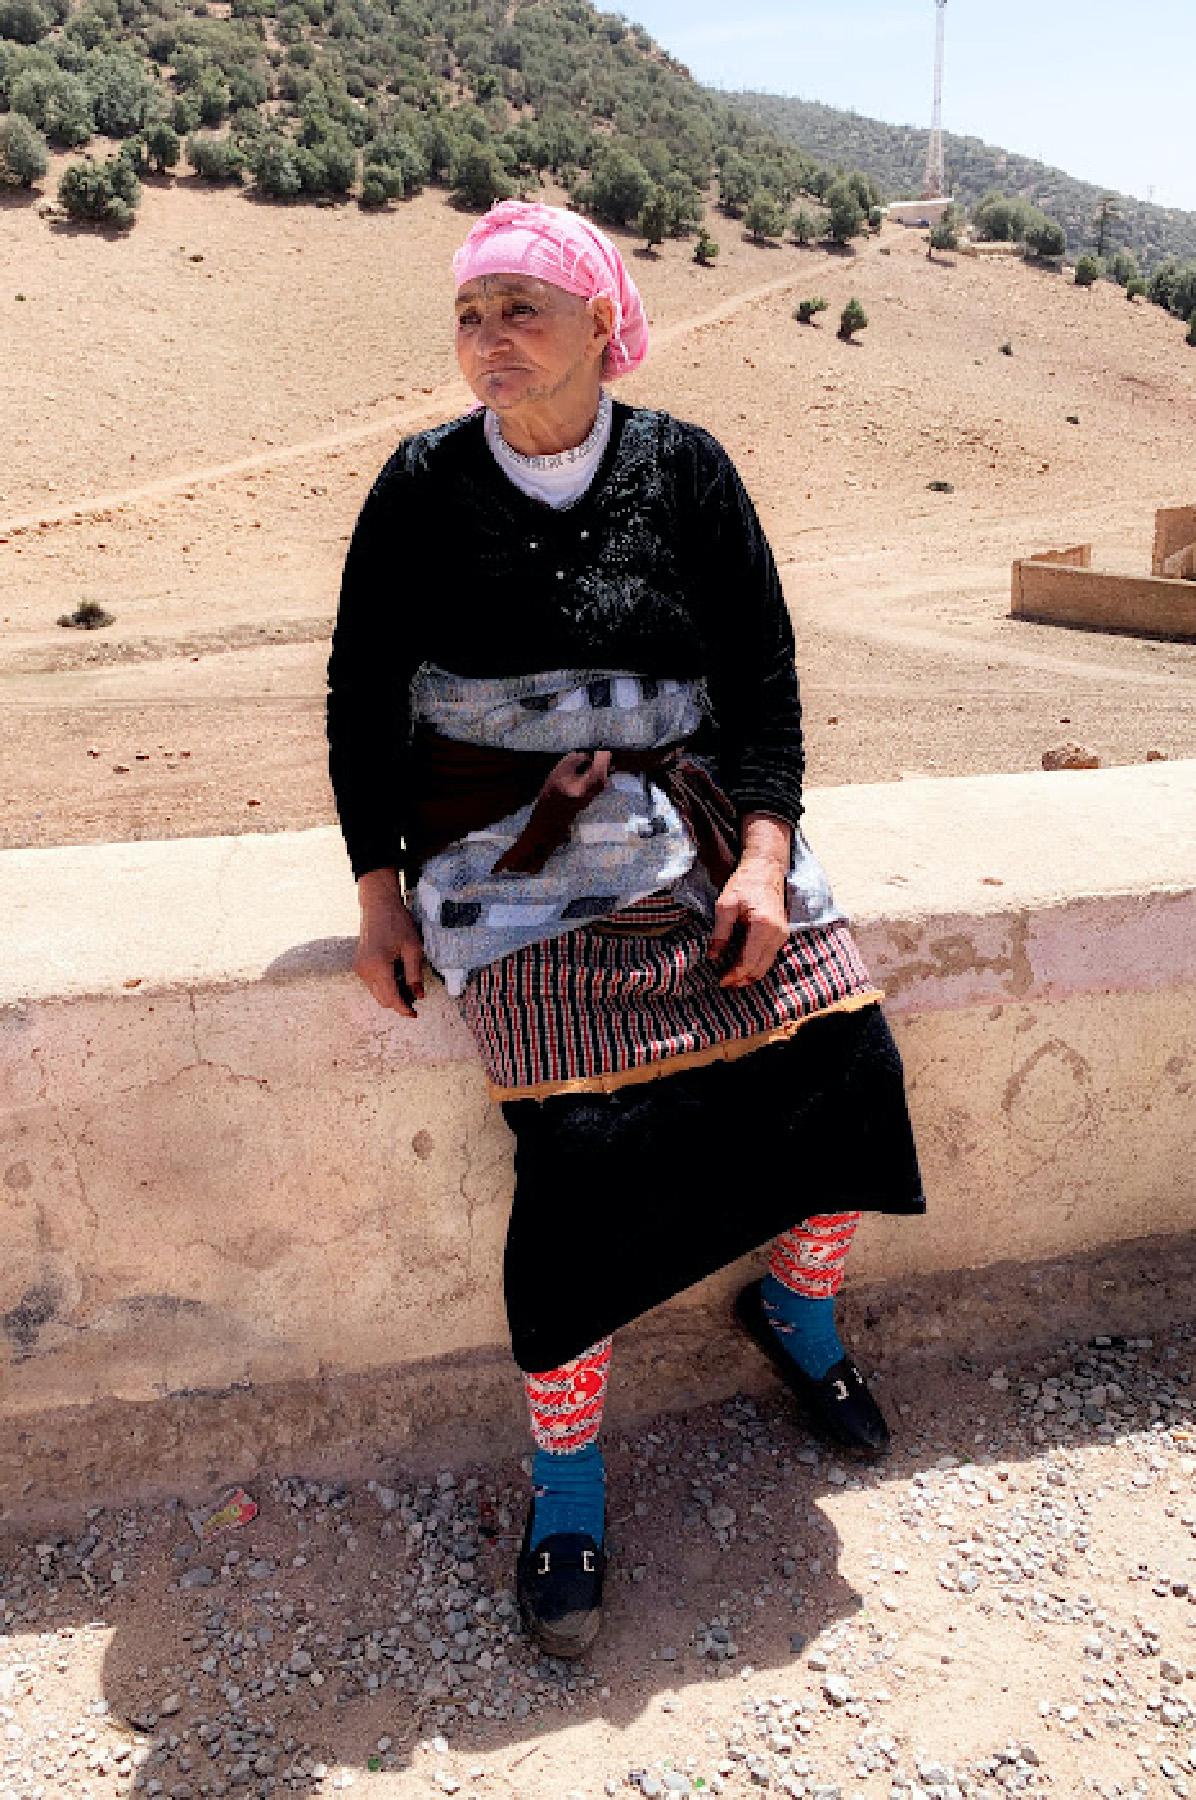 A Berber woman in Morocco visits with travelers who stop at her nomadic village. (Courtesy of Phil Allen)